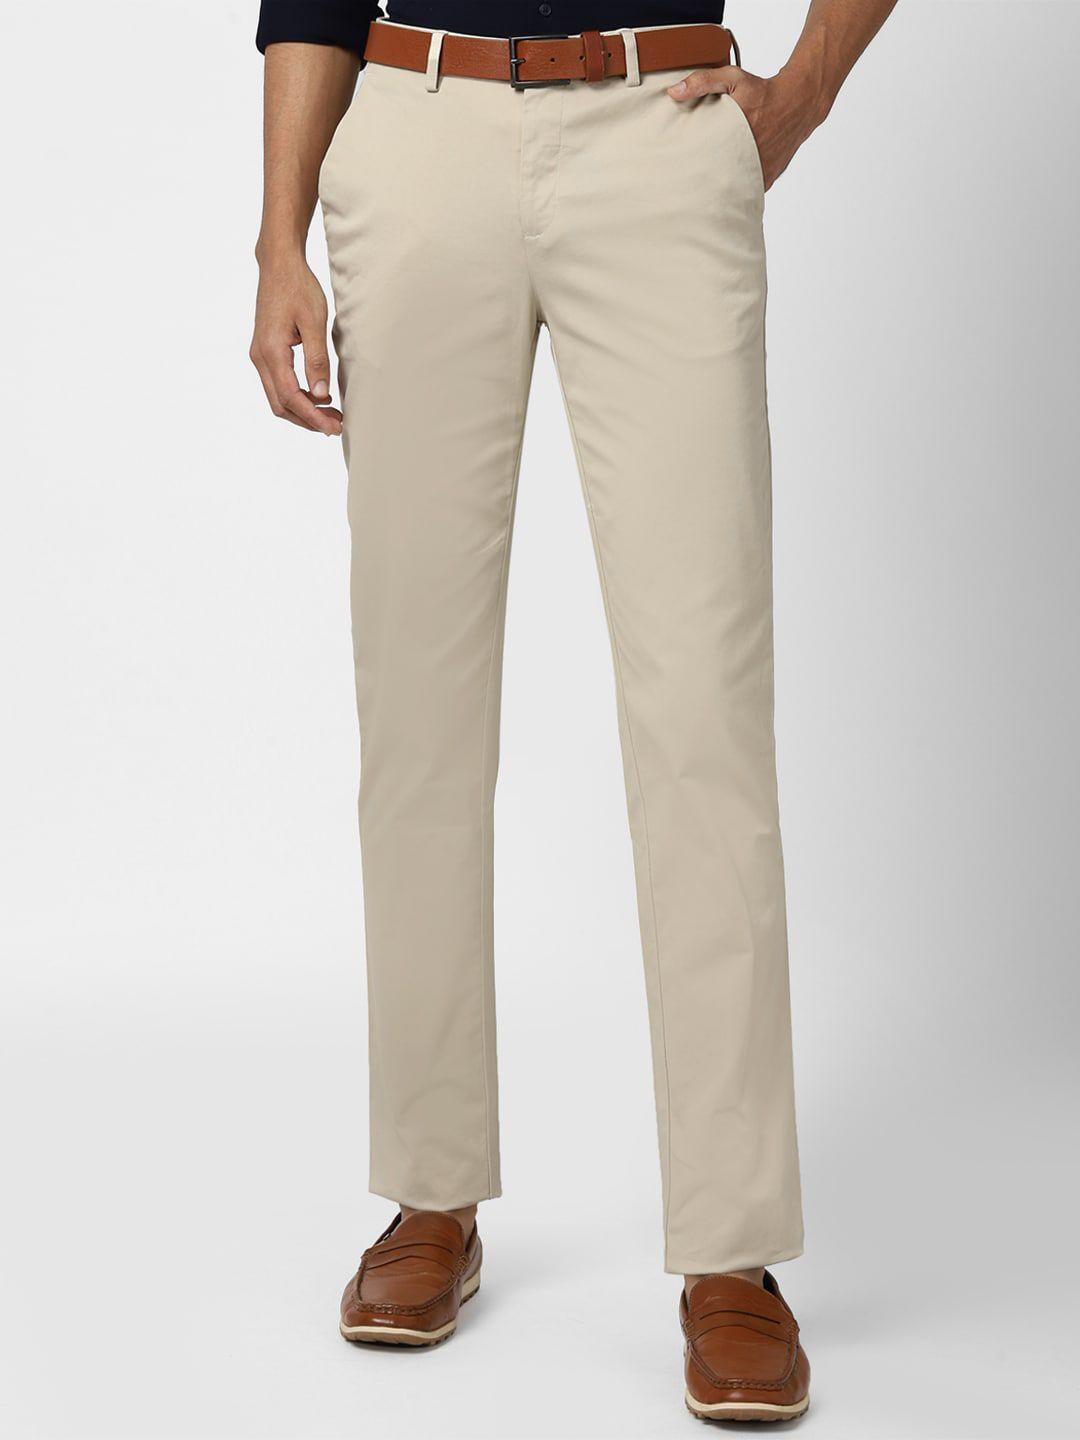 peter england casuals men beige slim fit chinos trousers